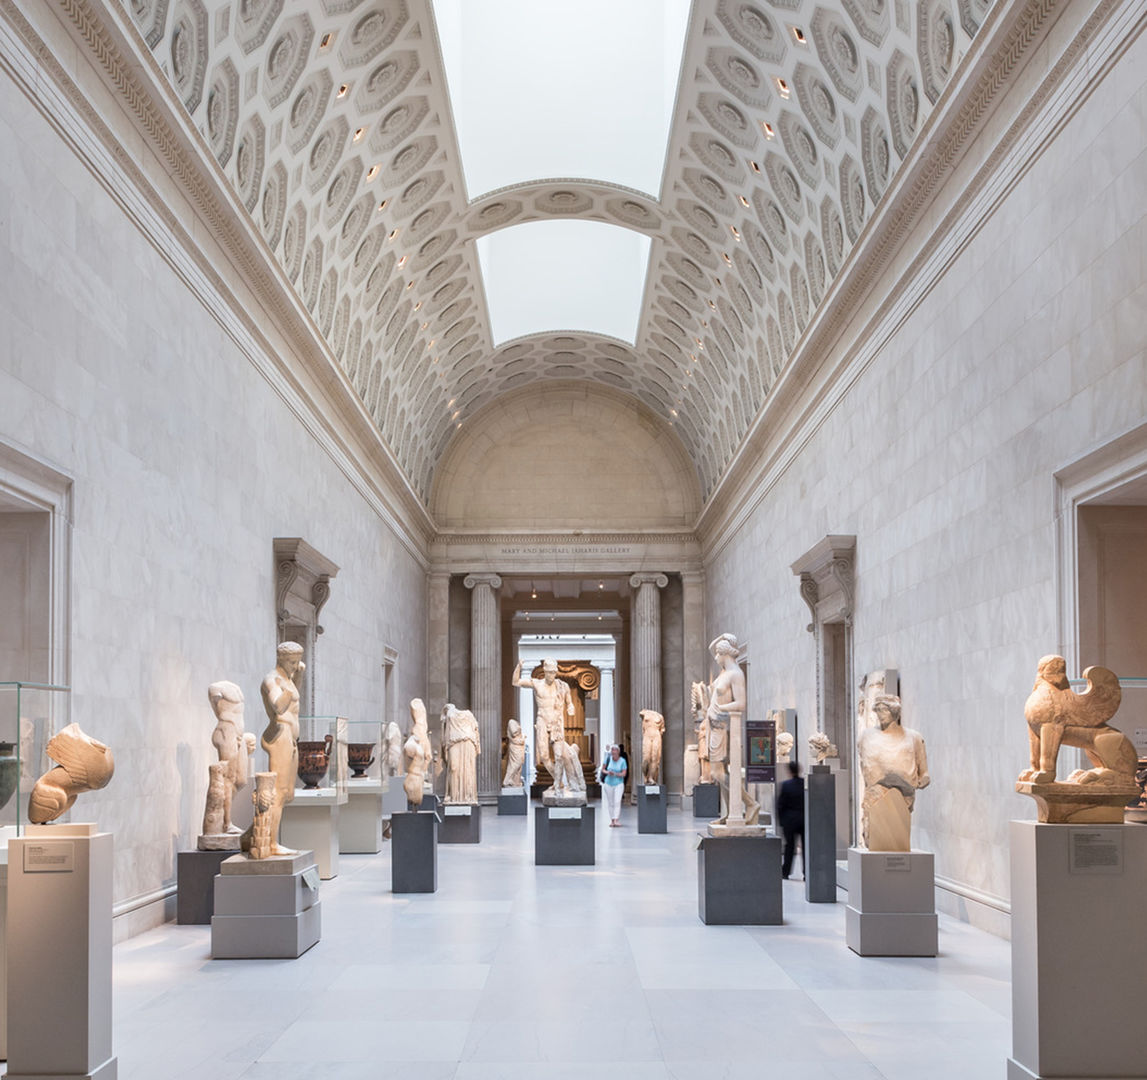 A view of The Met's Greek and Roman sculptures which line a sweeping hallway.